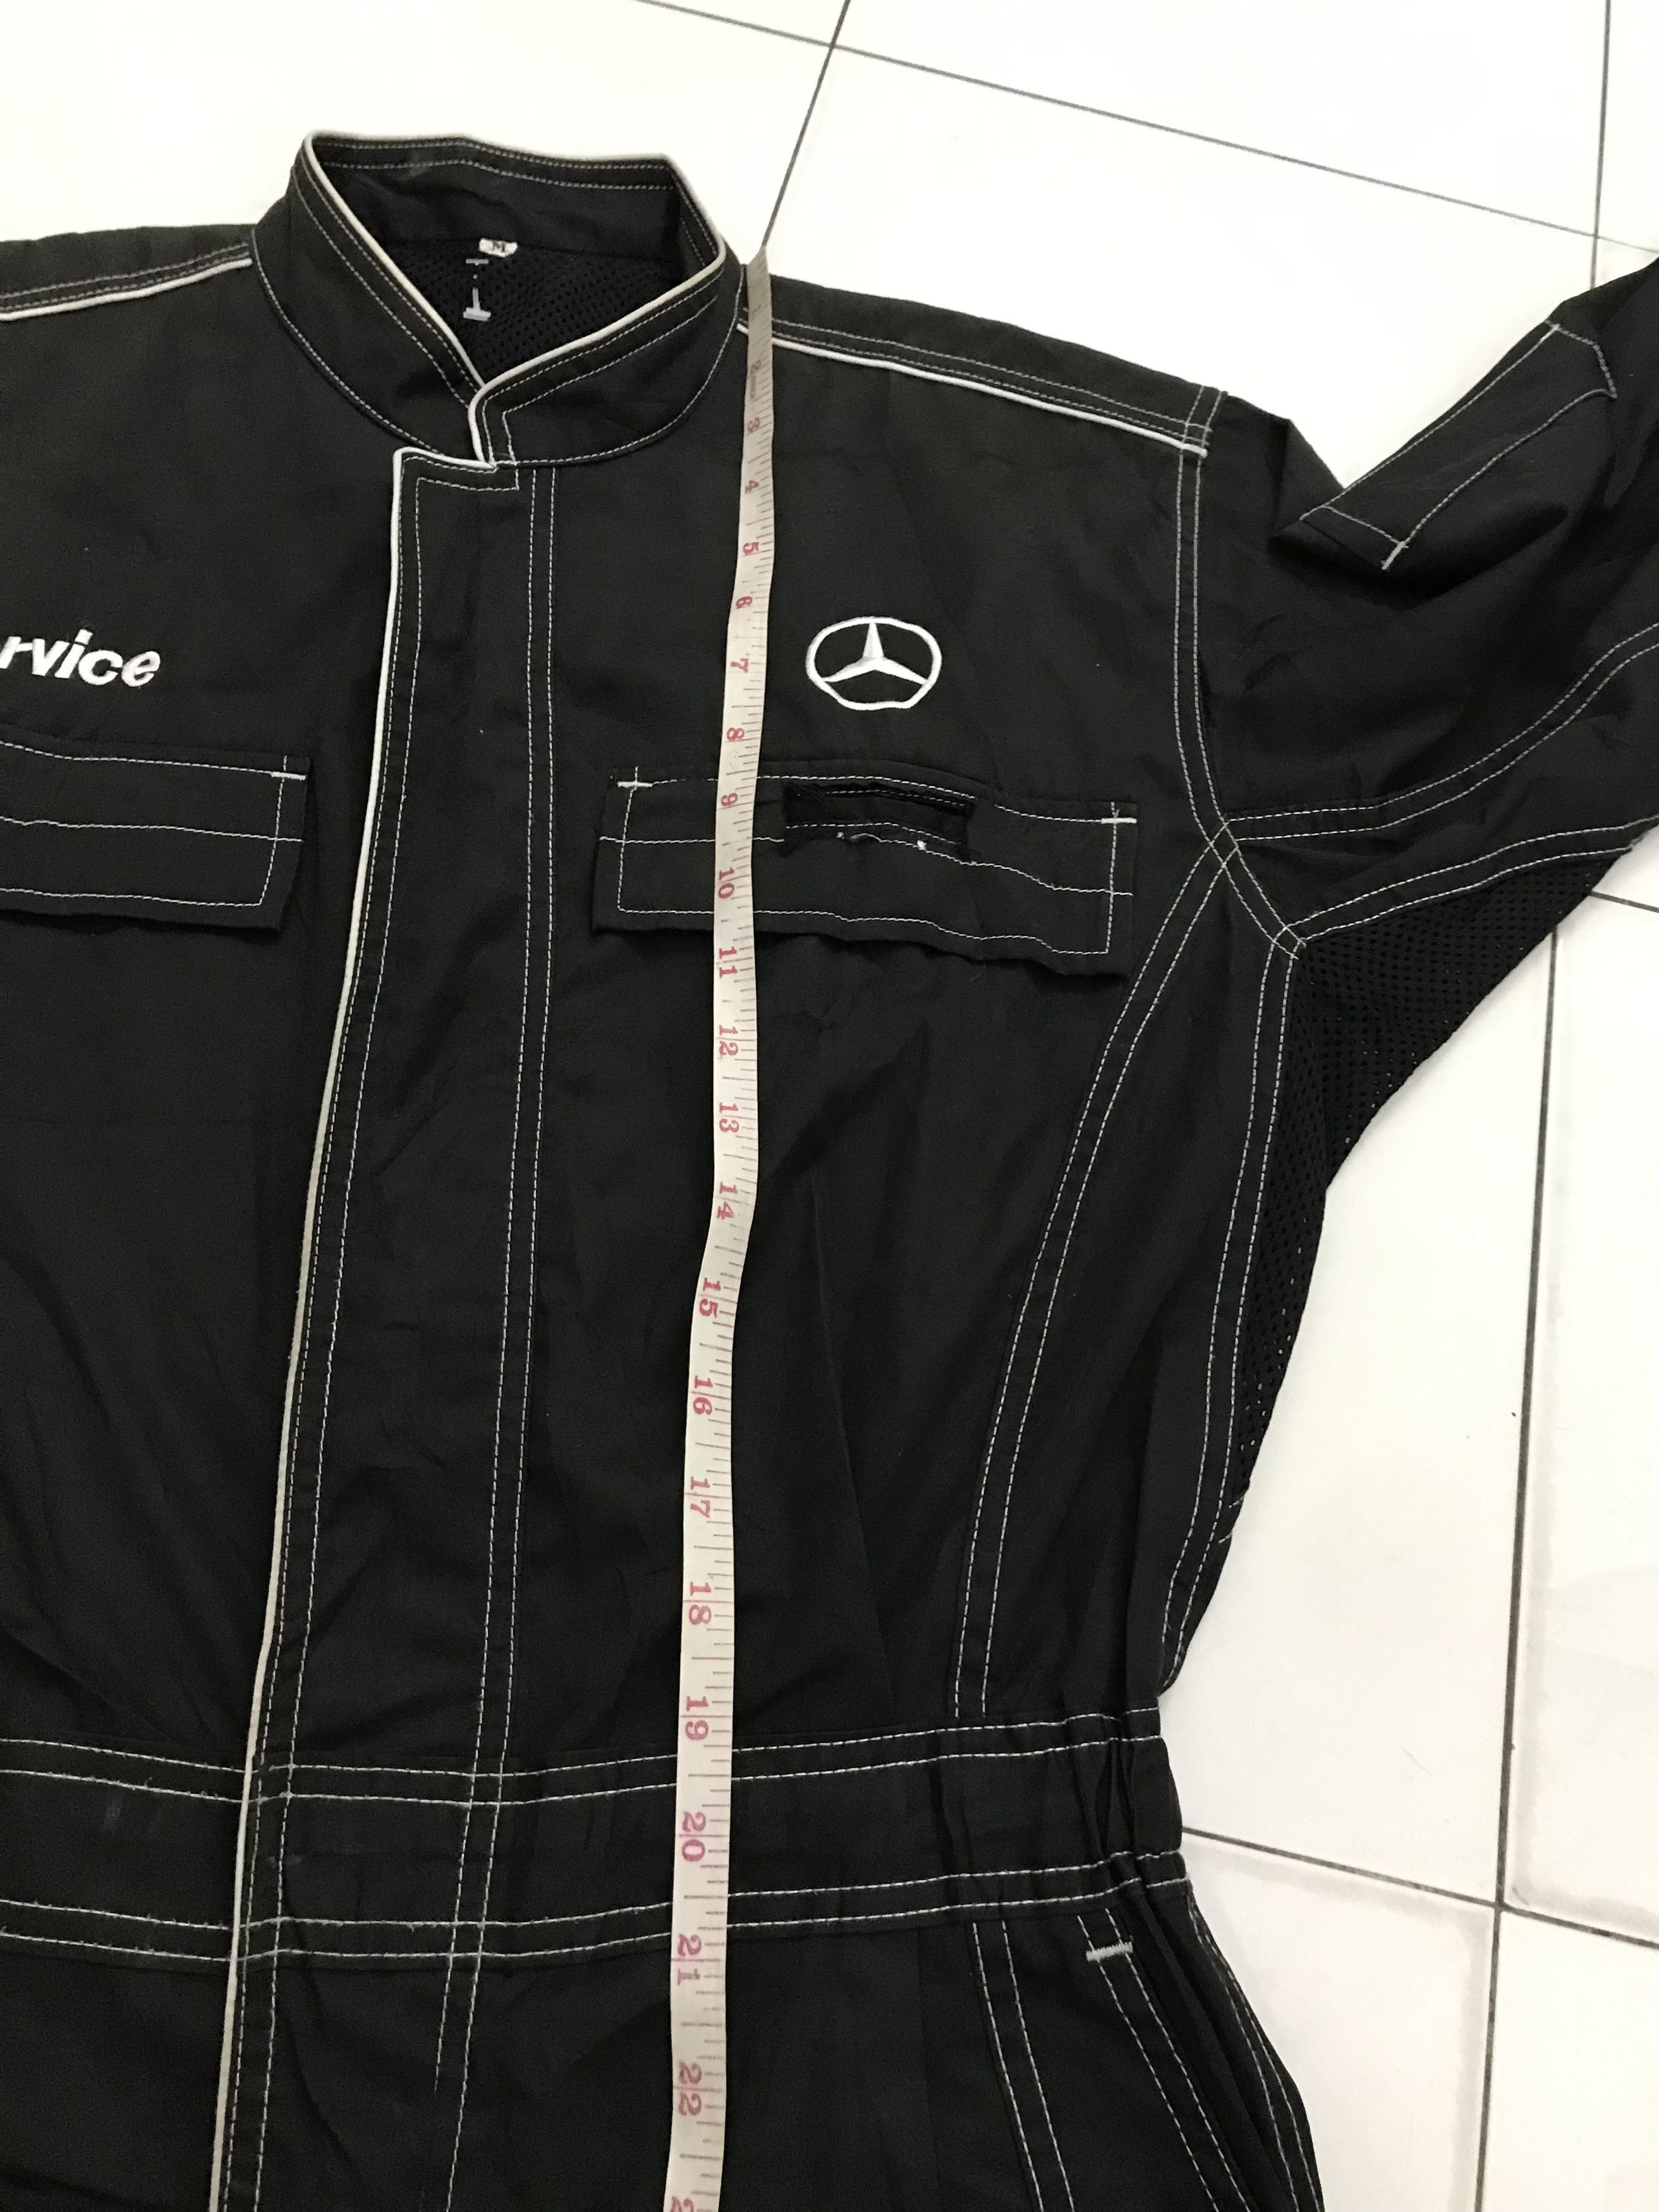 Vintage Mercedes Benz Distressed Overalls Coveralls Size US 31 - 9 Thumbnail